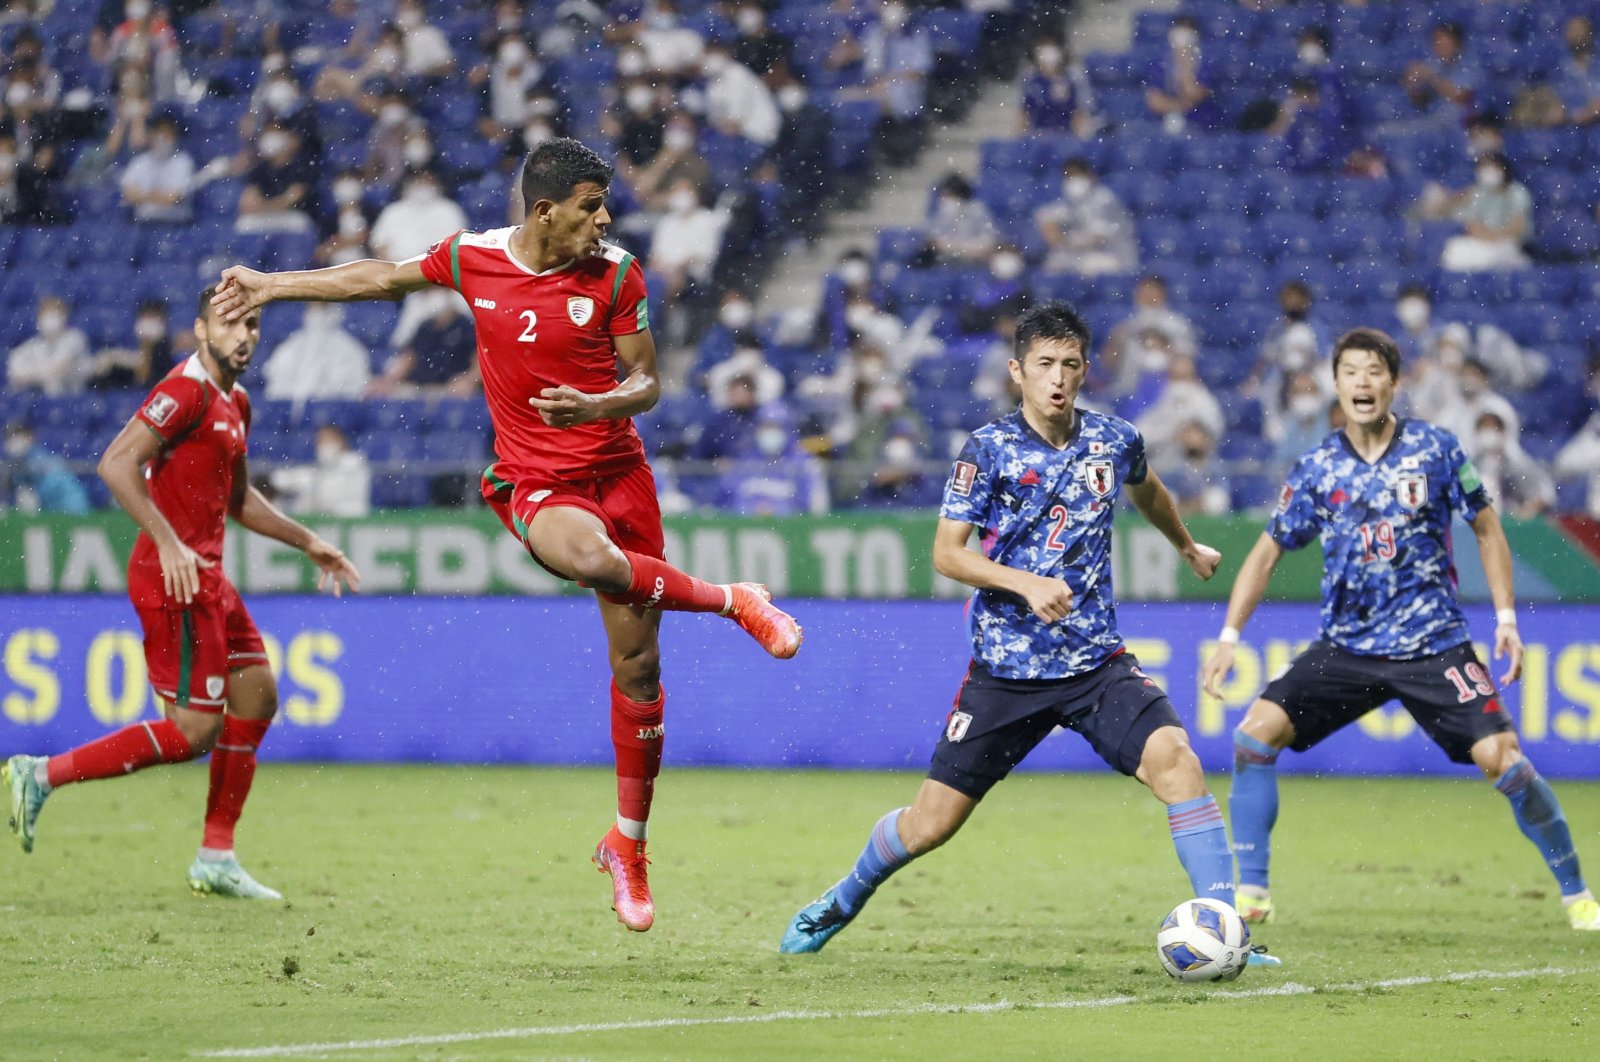 Oman's Issam al Sabhi scores against Japan in their World Cup Asian qualifiers match at the Panasonic Stadium, Suita, Japan, Sept. 2, 2021. (Reuters Photo)